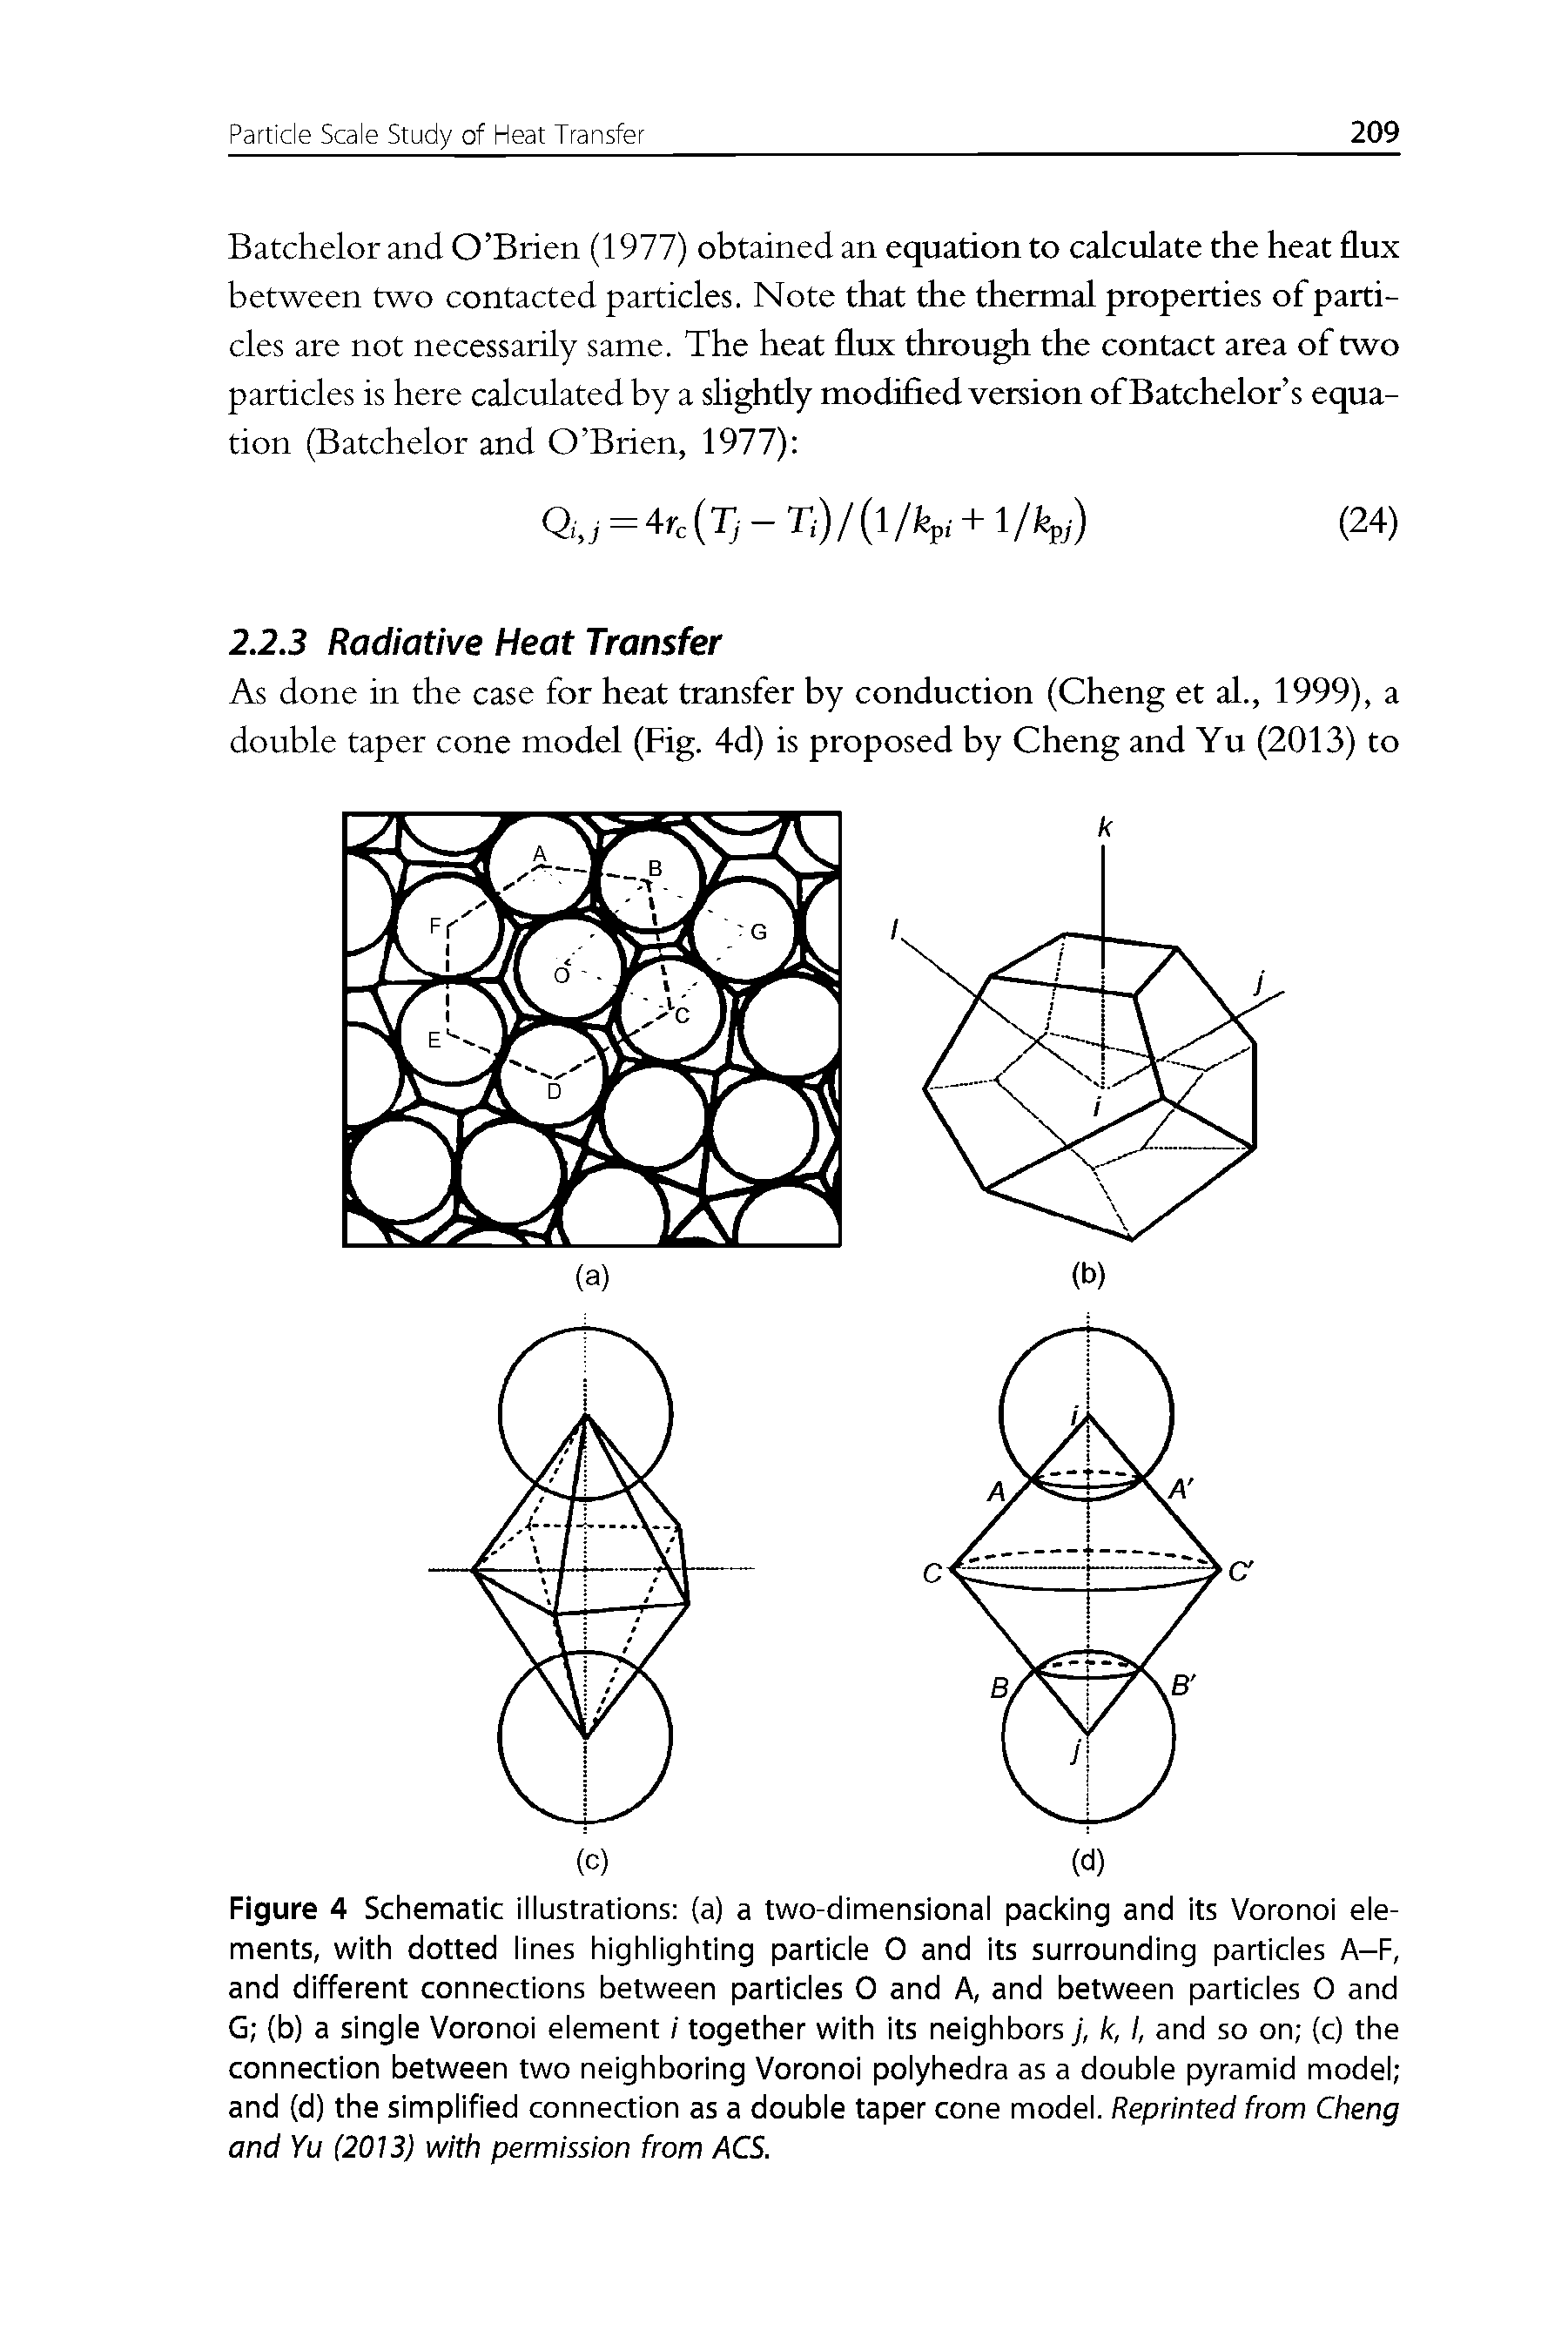 Figure 4 Schematic illustrations (a) a two-dimensional packing and its Voronoi elements, with dotted lines highlighting particle O and its surrounding particles A-F, and different connections between particles O and A, and between particles O and G (b) a single Voronoi element / together with its neighbors j, k, I, and so on (c) the connection between two neighboring Voronoi polyhedra as a double pyramid model and (d) the simplified connection as a double taper cone model. Reprinted from Cheng and Yu (2013) with permission from ACS.